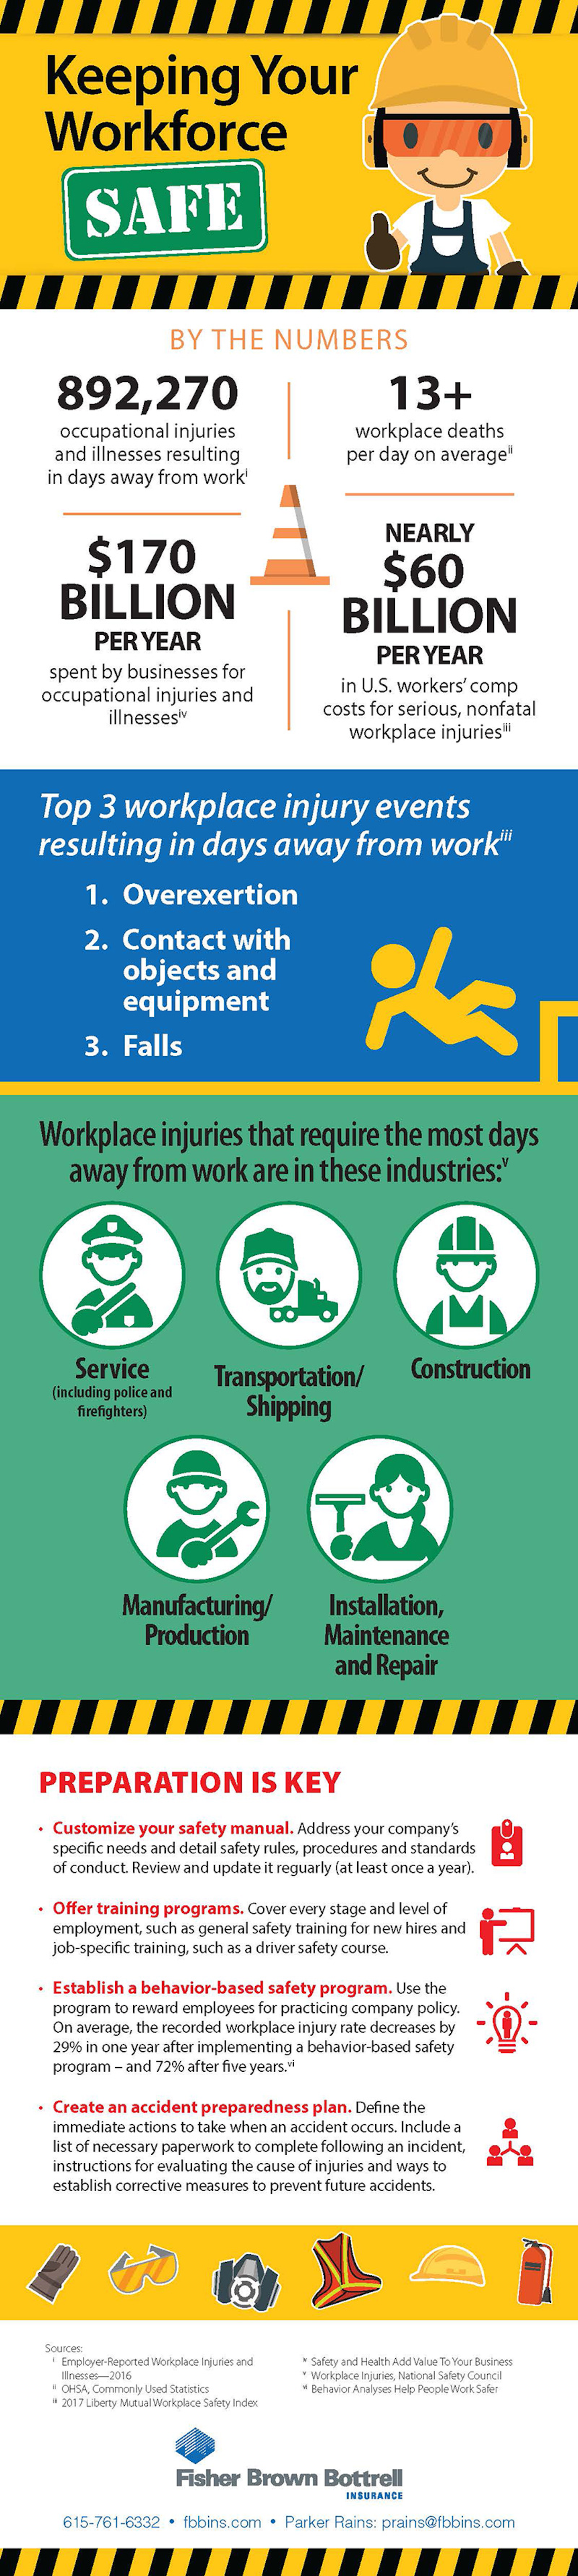 Infographic: Keeping Your Workforce Safe | Manufacturing.net